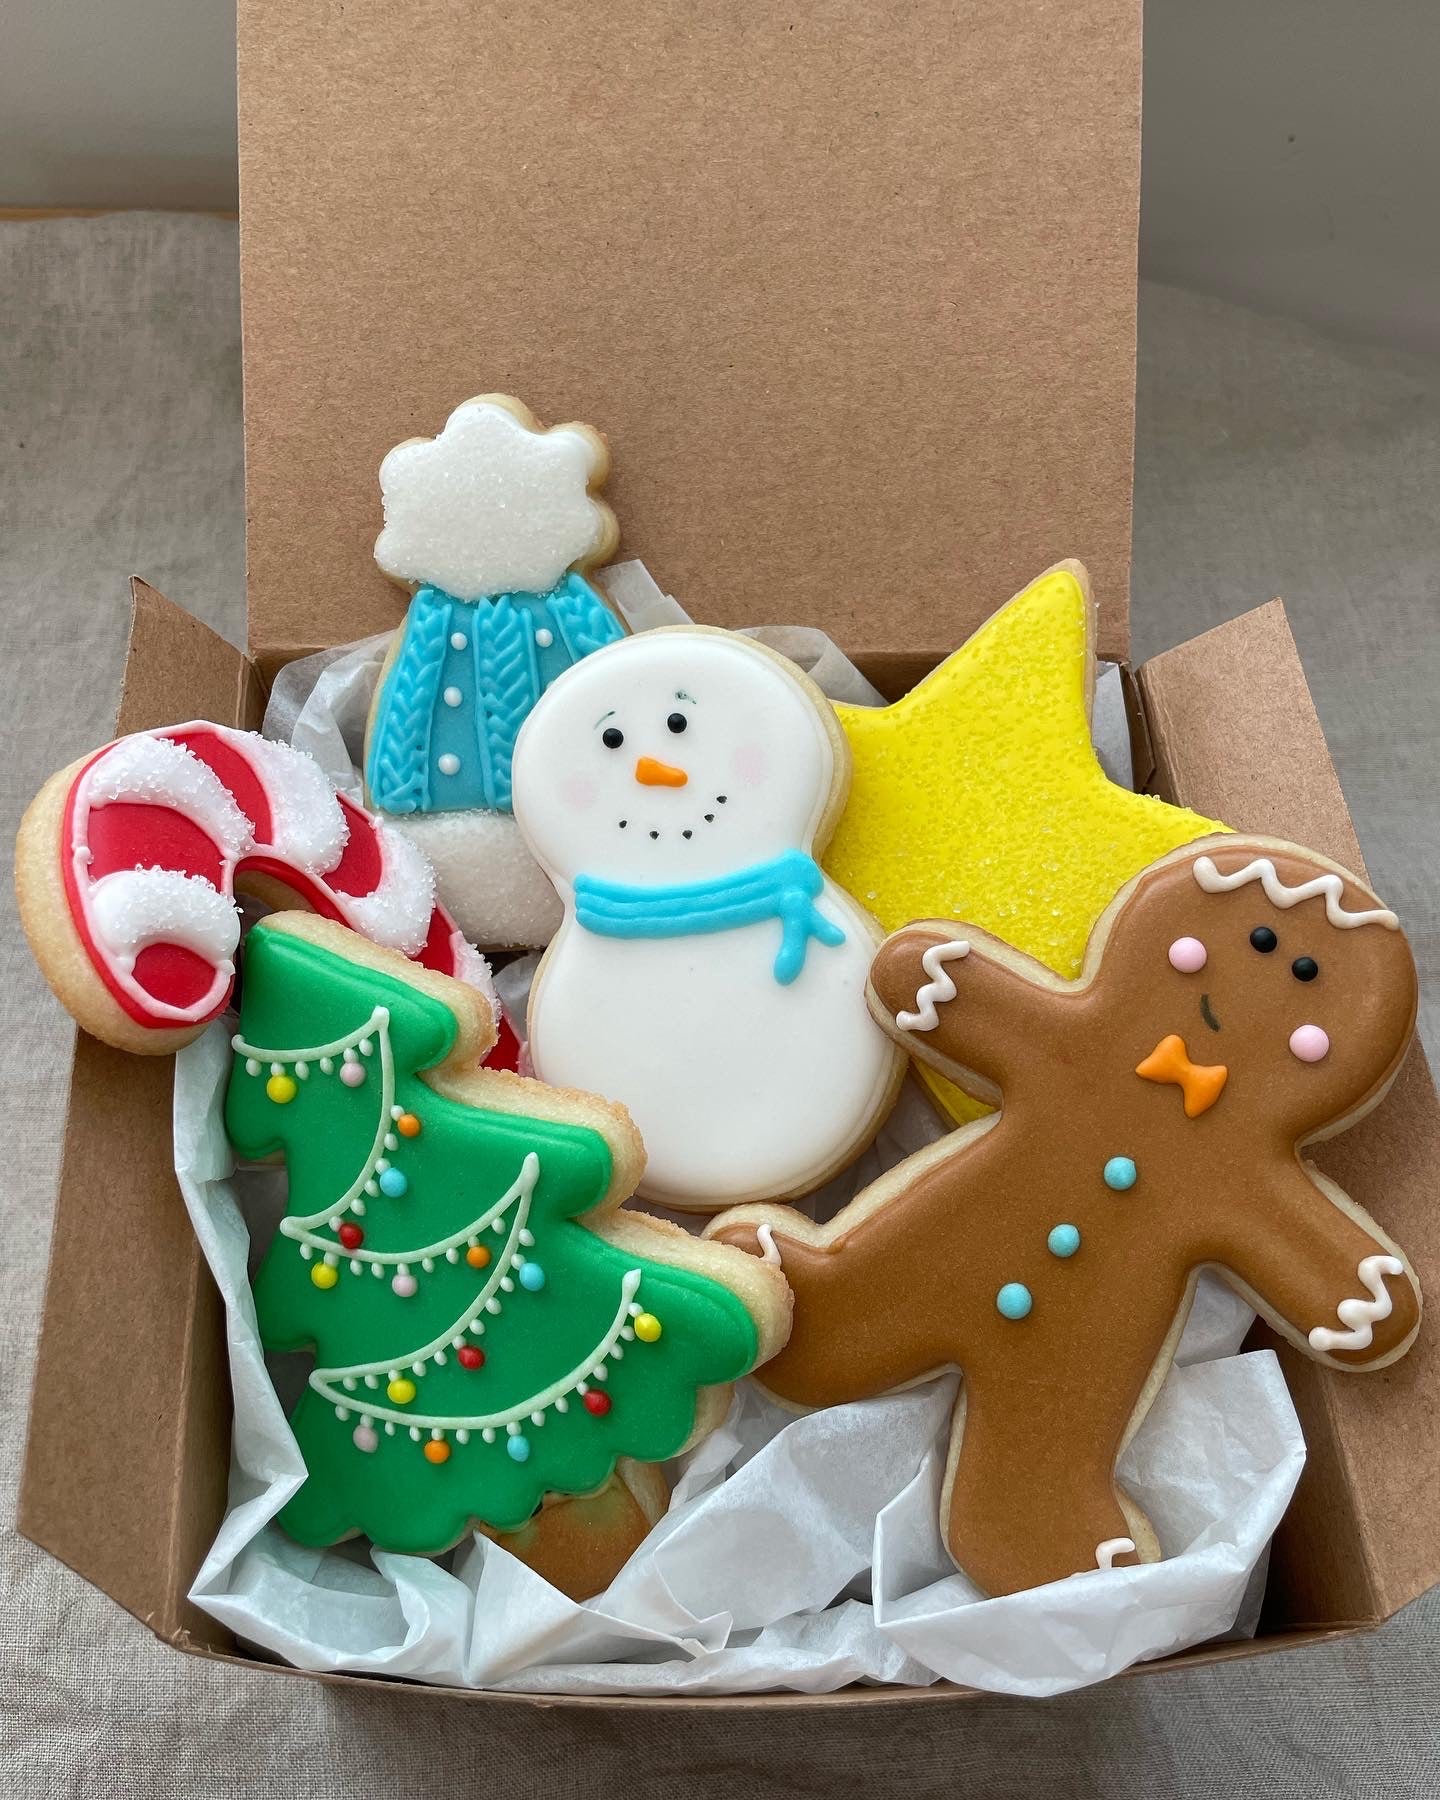 12 Days of Hosting: The Sweetest Sugar Cookies